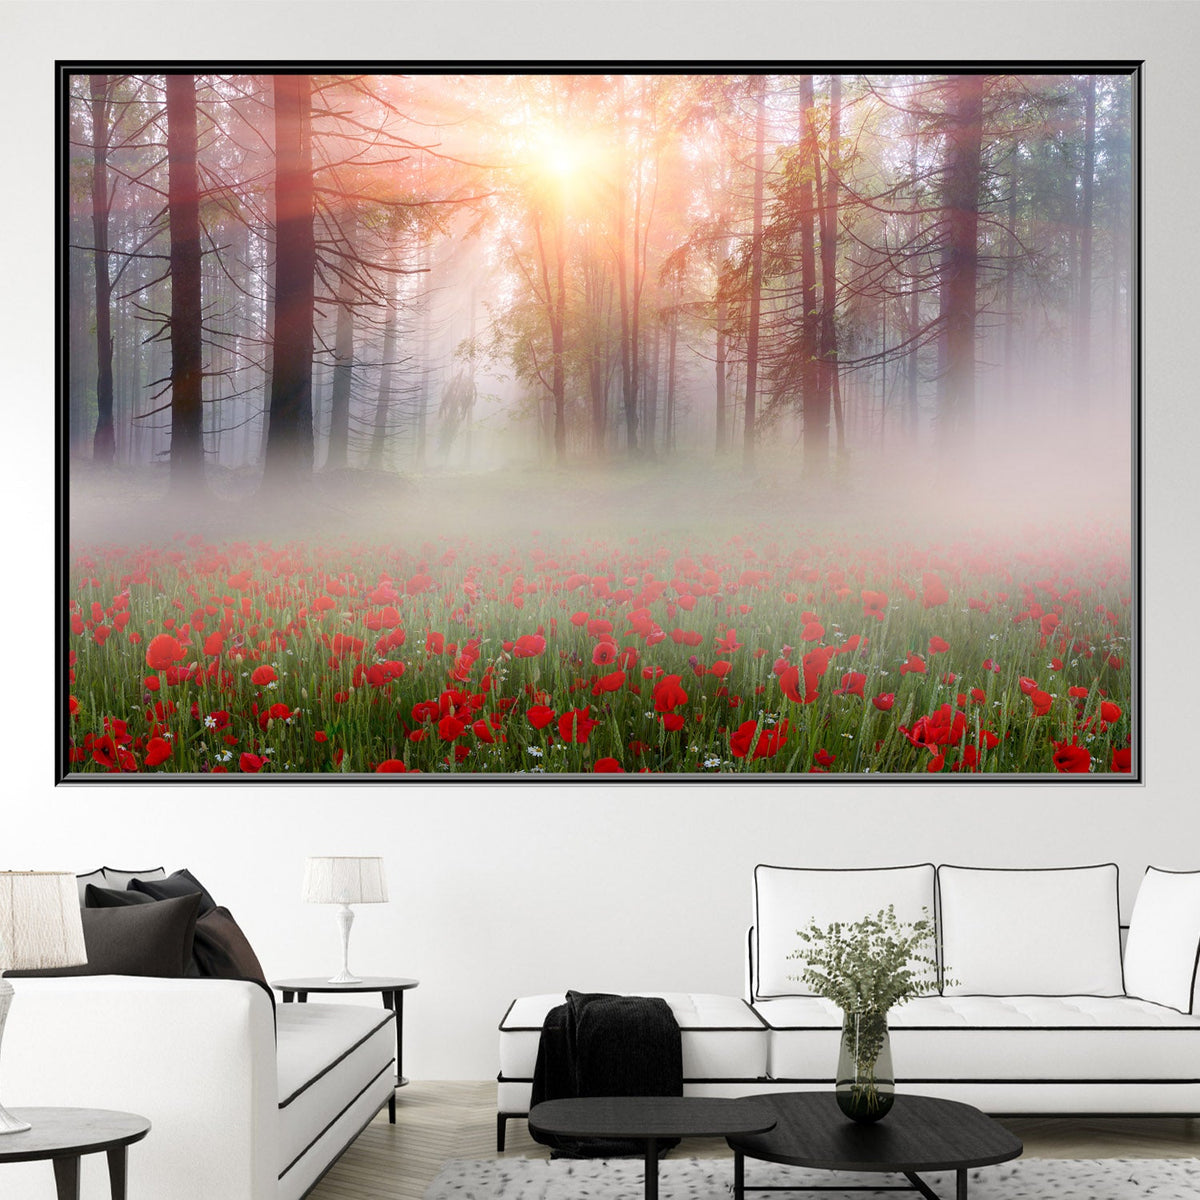 https://cdn.shopify.com/s/files/1/0387/9986/8044/products/PoppiesintheForestCanvasArtprintStretched-FloatingFrame-2.jpg